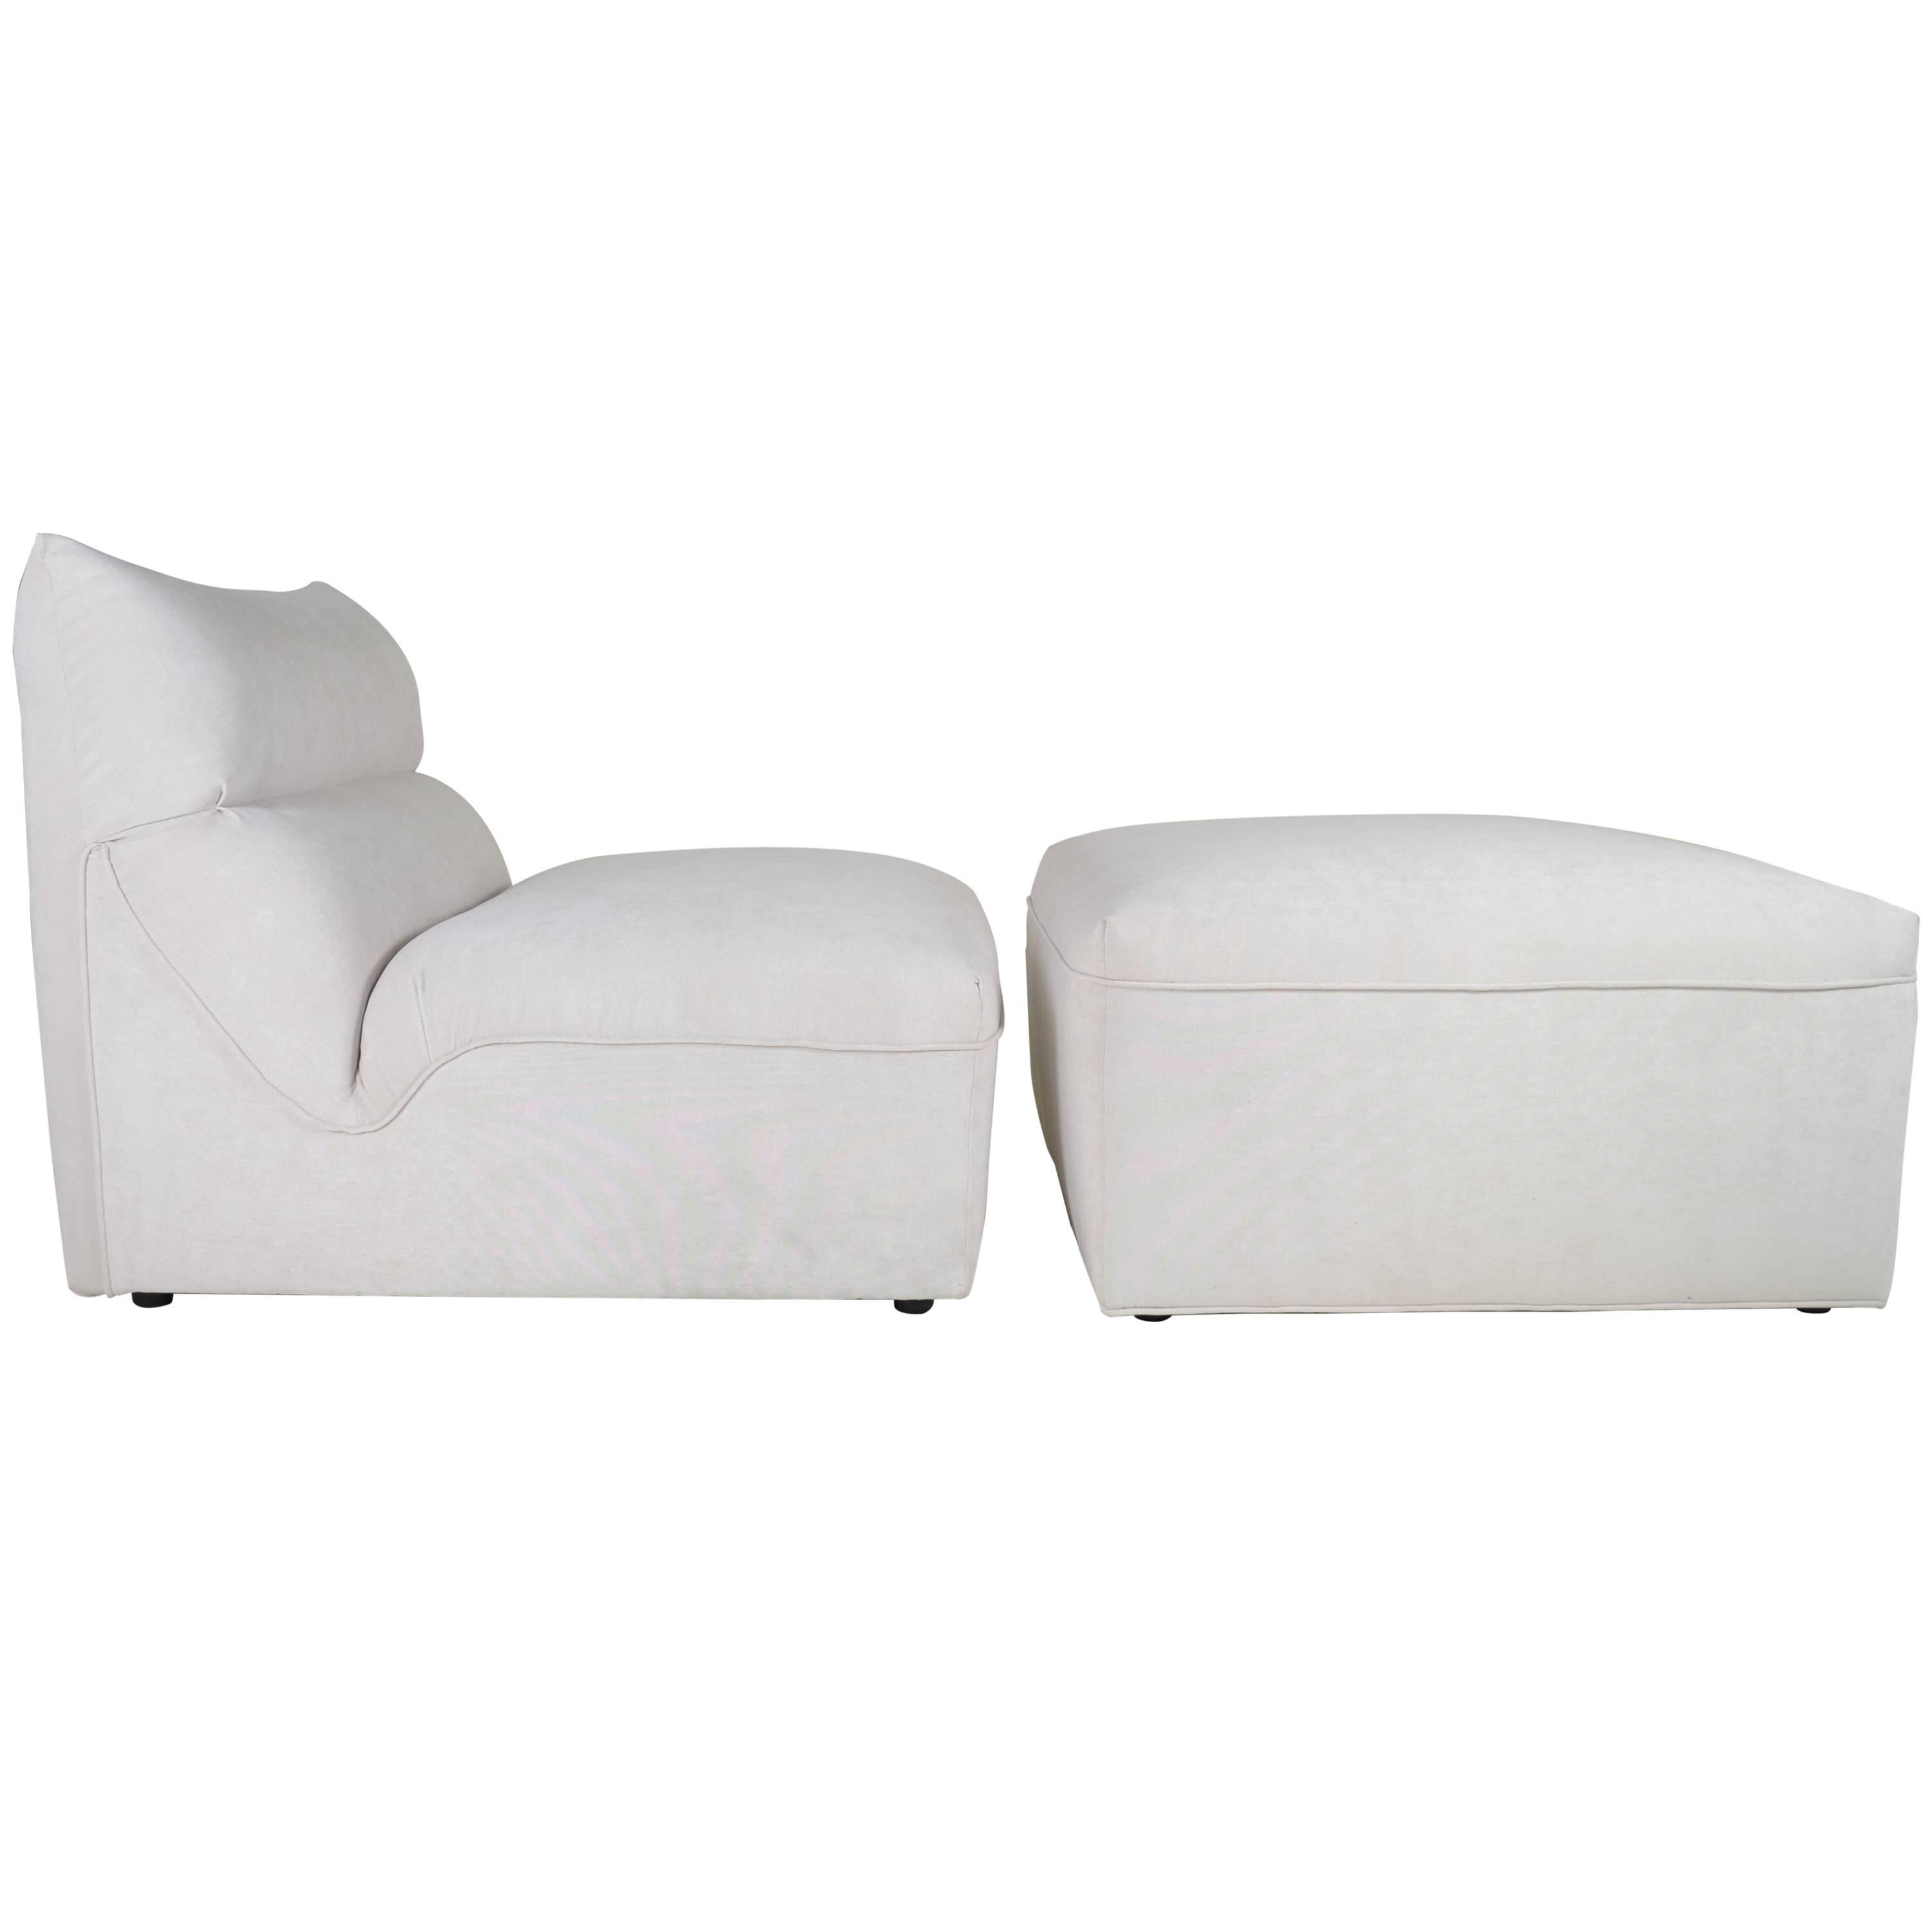 Guido Falescyhini for Pace Lounge Chair and Ottoman, circa 1980s